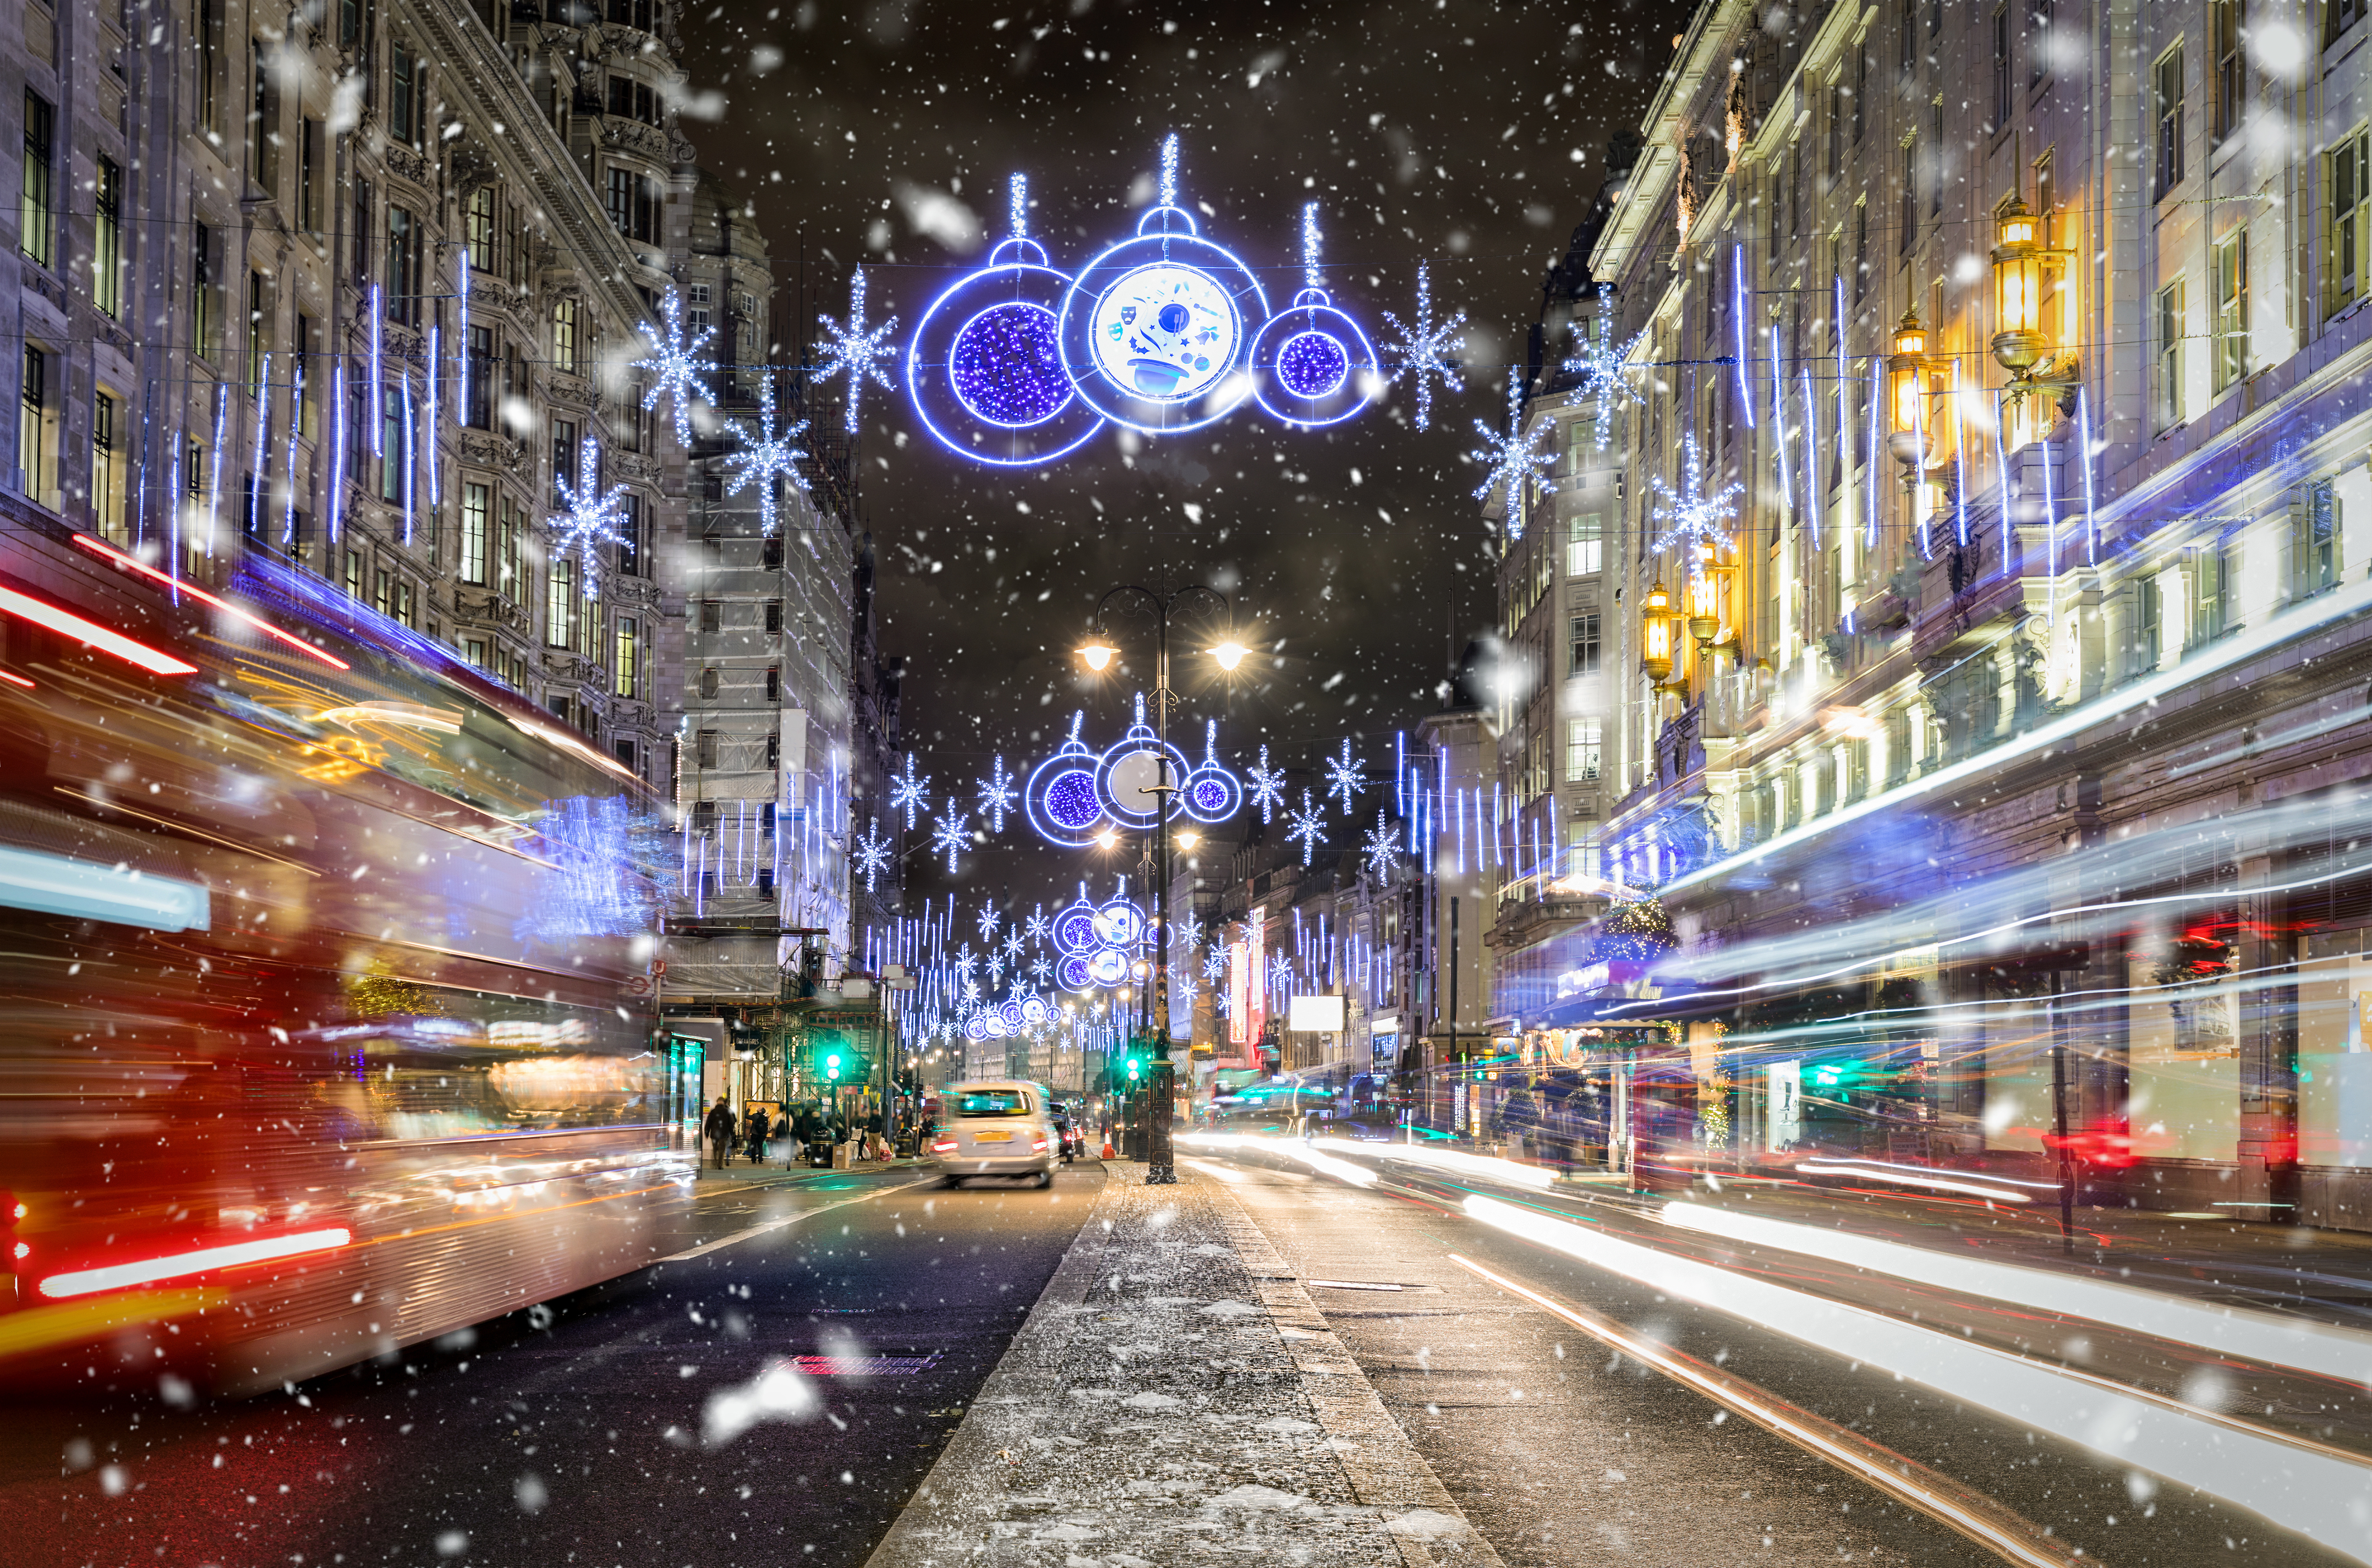 11 of the most magical Christmas towns in the UK and Ireland